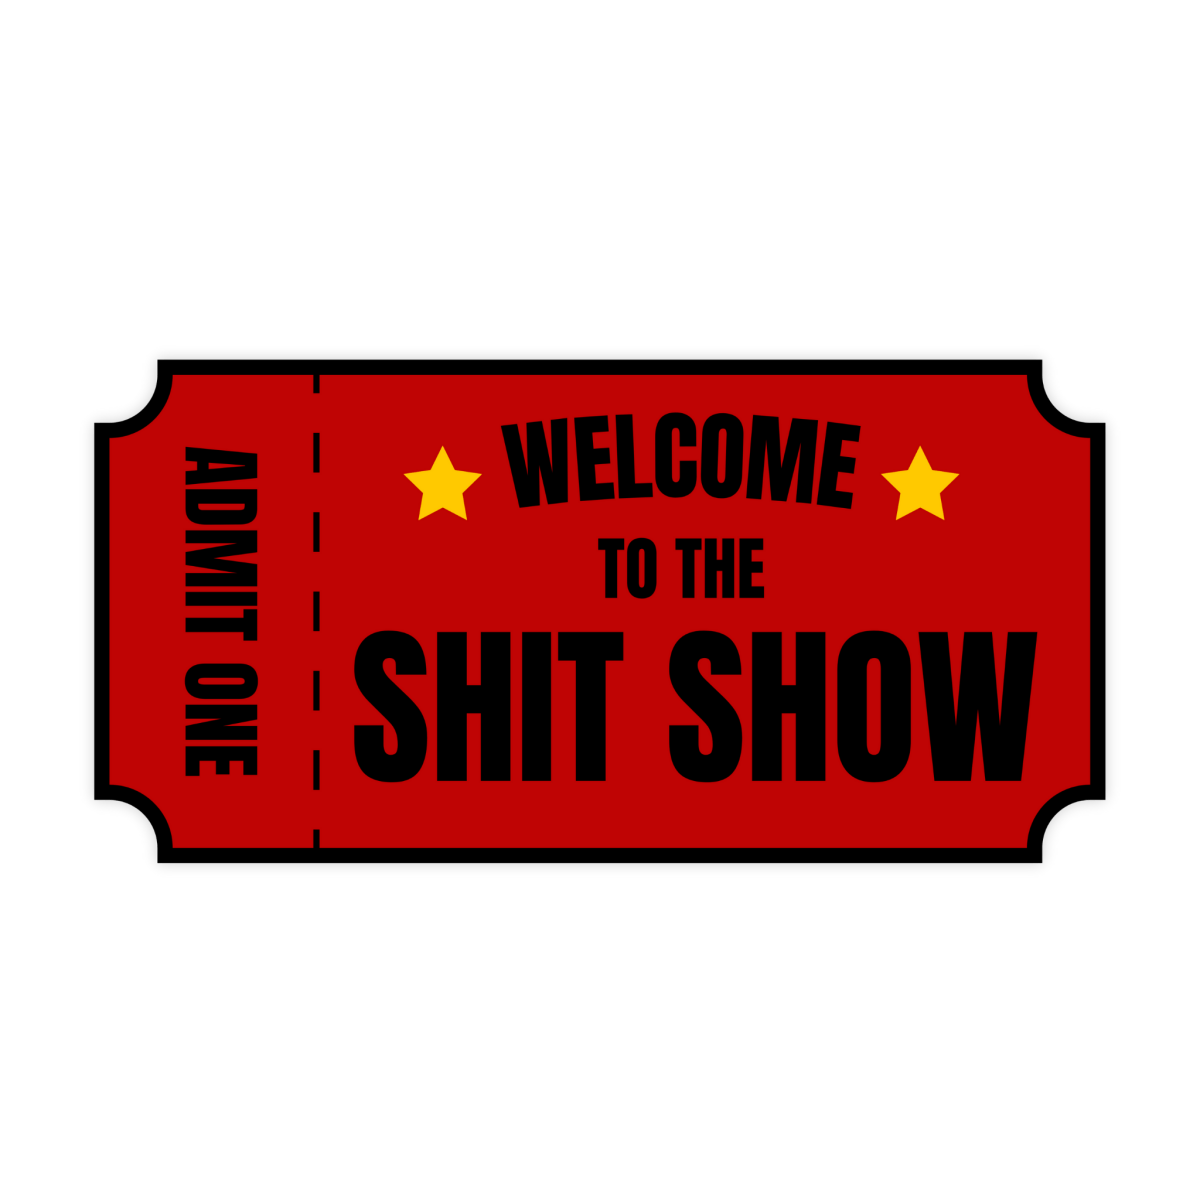 Welcome To The Shit Show Admit One Sticker - stickerbullWelcome To The Shit Show Admit One StickerRetail StickerstickerbullstickerbullSage_Shitshow [#182]Welcome To The Shit Show Admit One Sticker